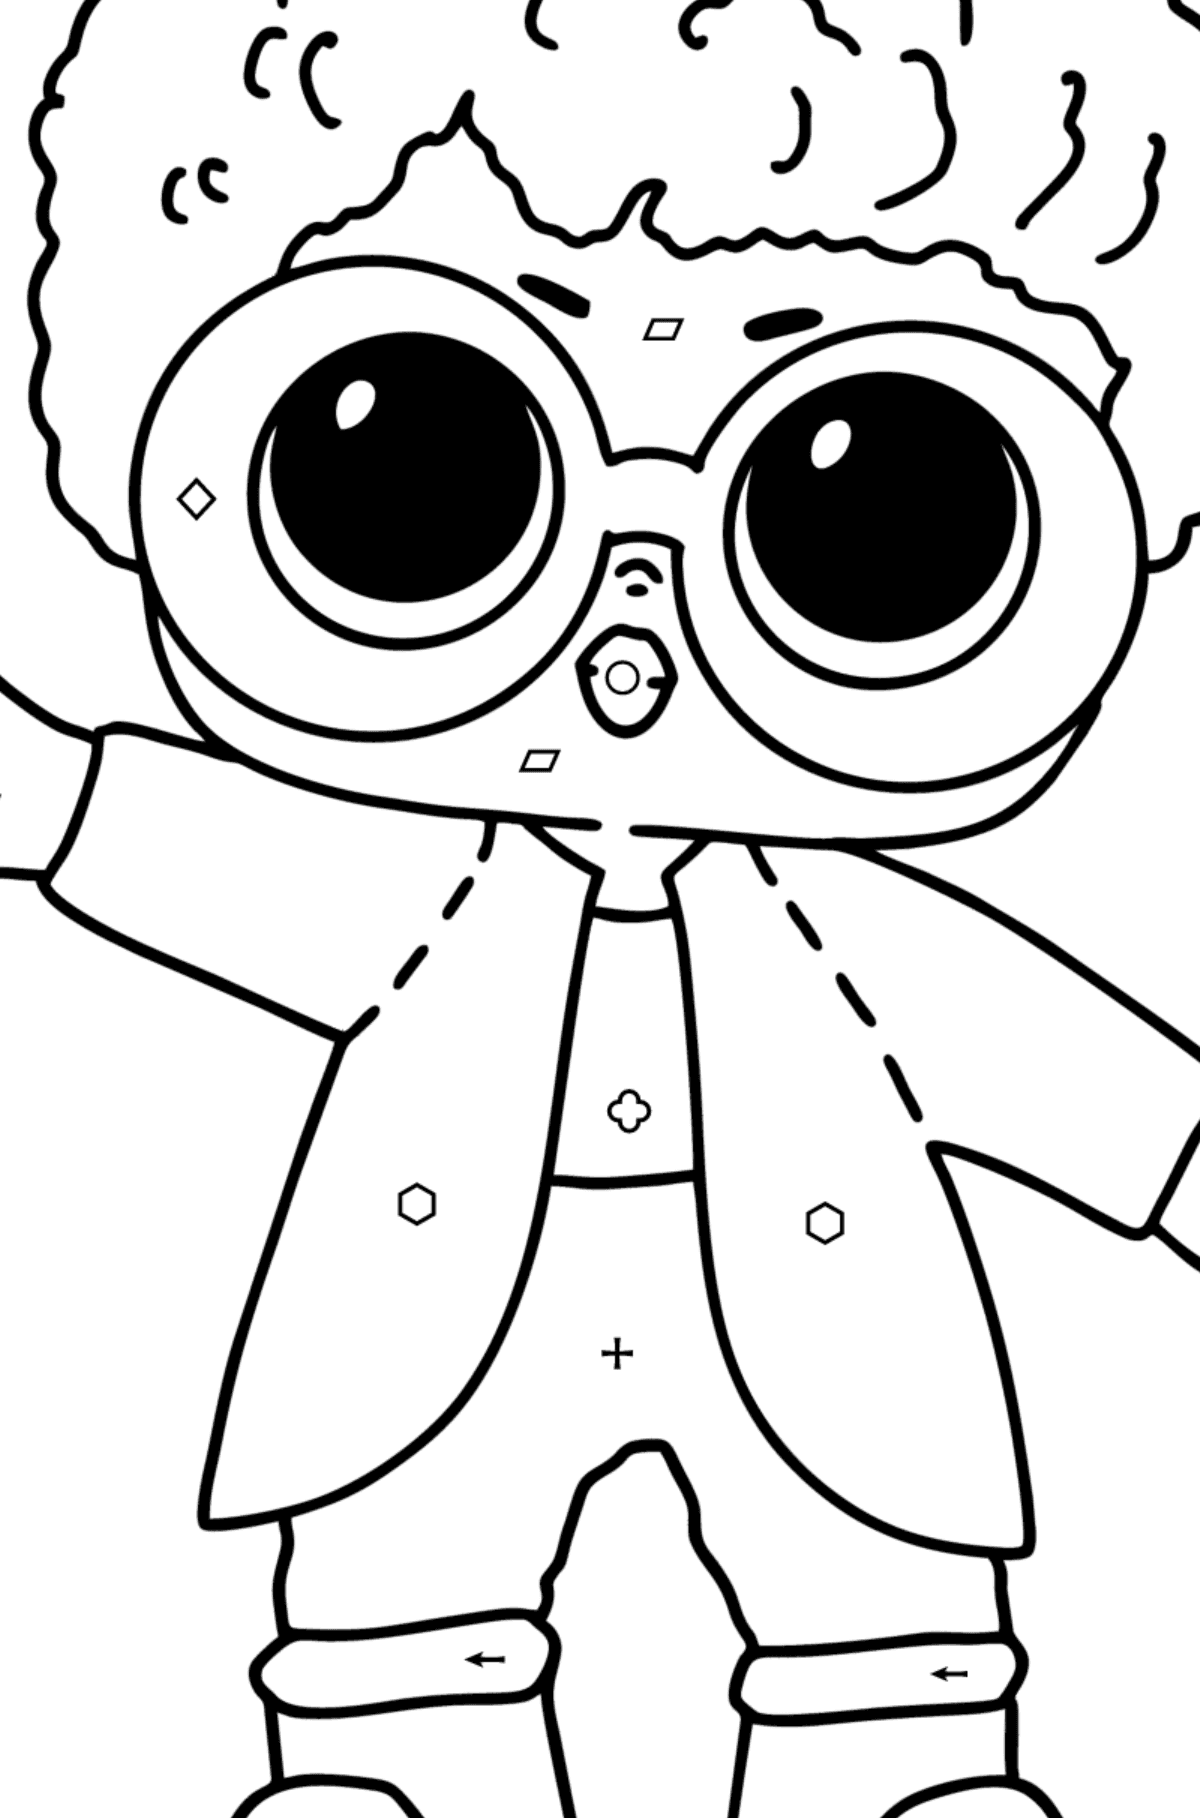 LOL Surprise Purple Reign Doll Boy coloring page - Coloring by Symbols and Geometric Shapes for Kids